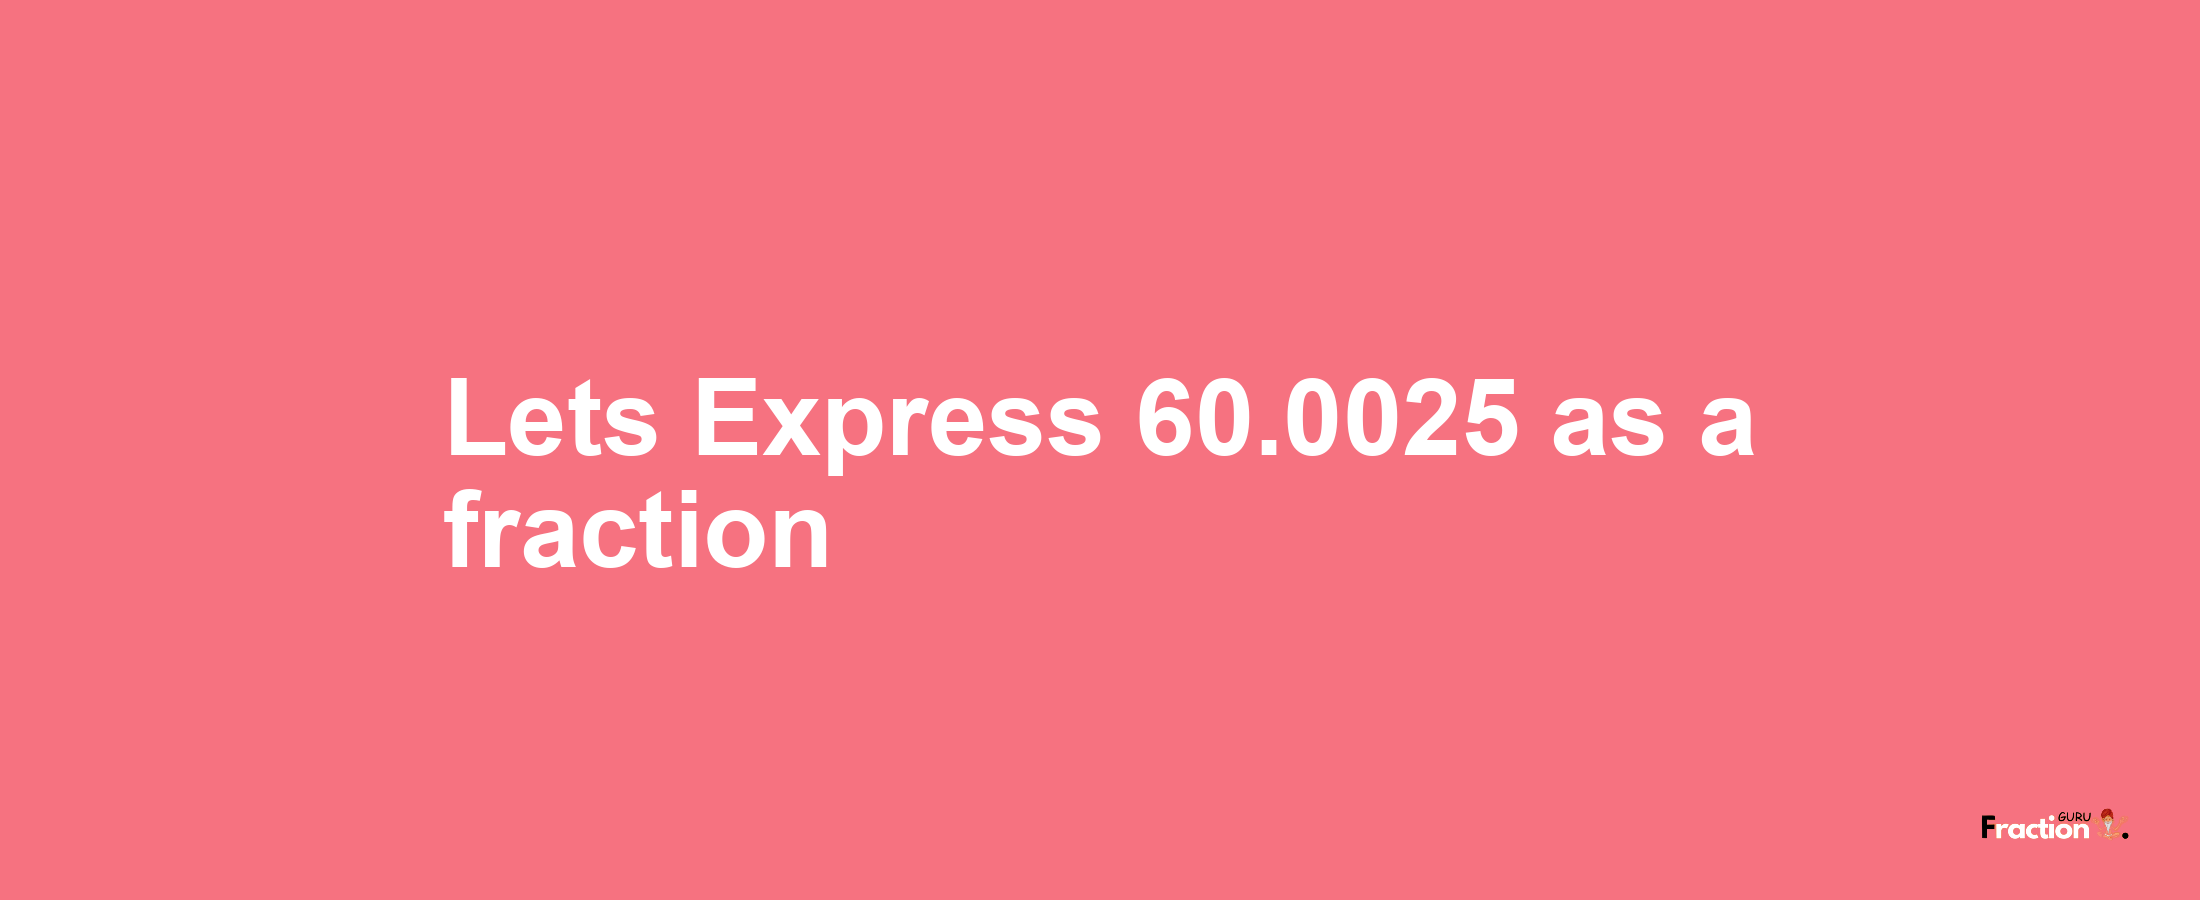 Lets Express 60.0025 as afraction